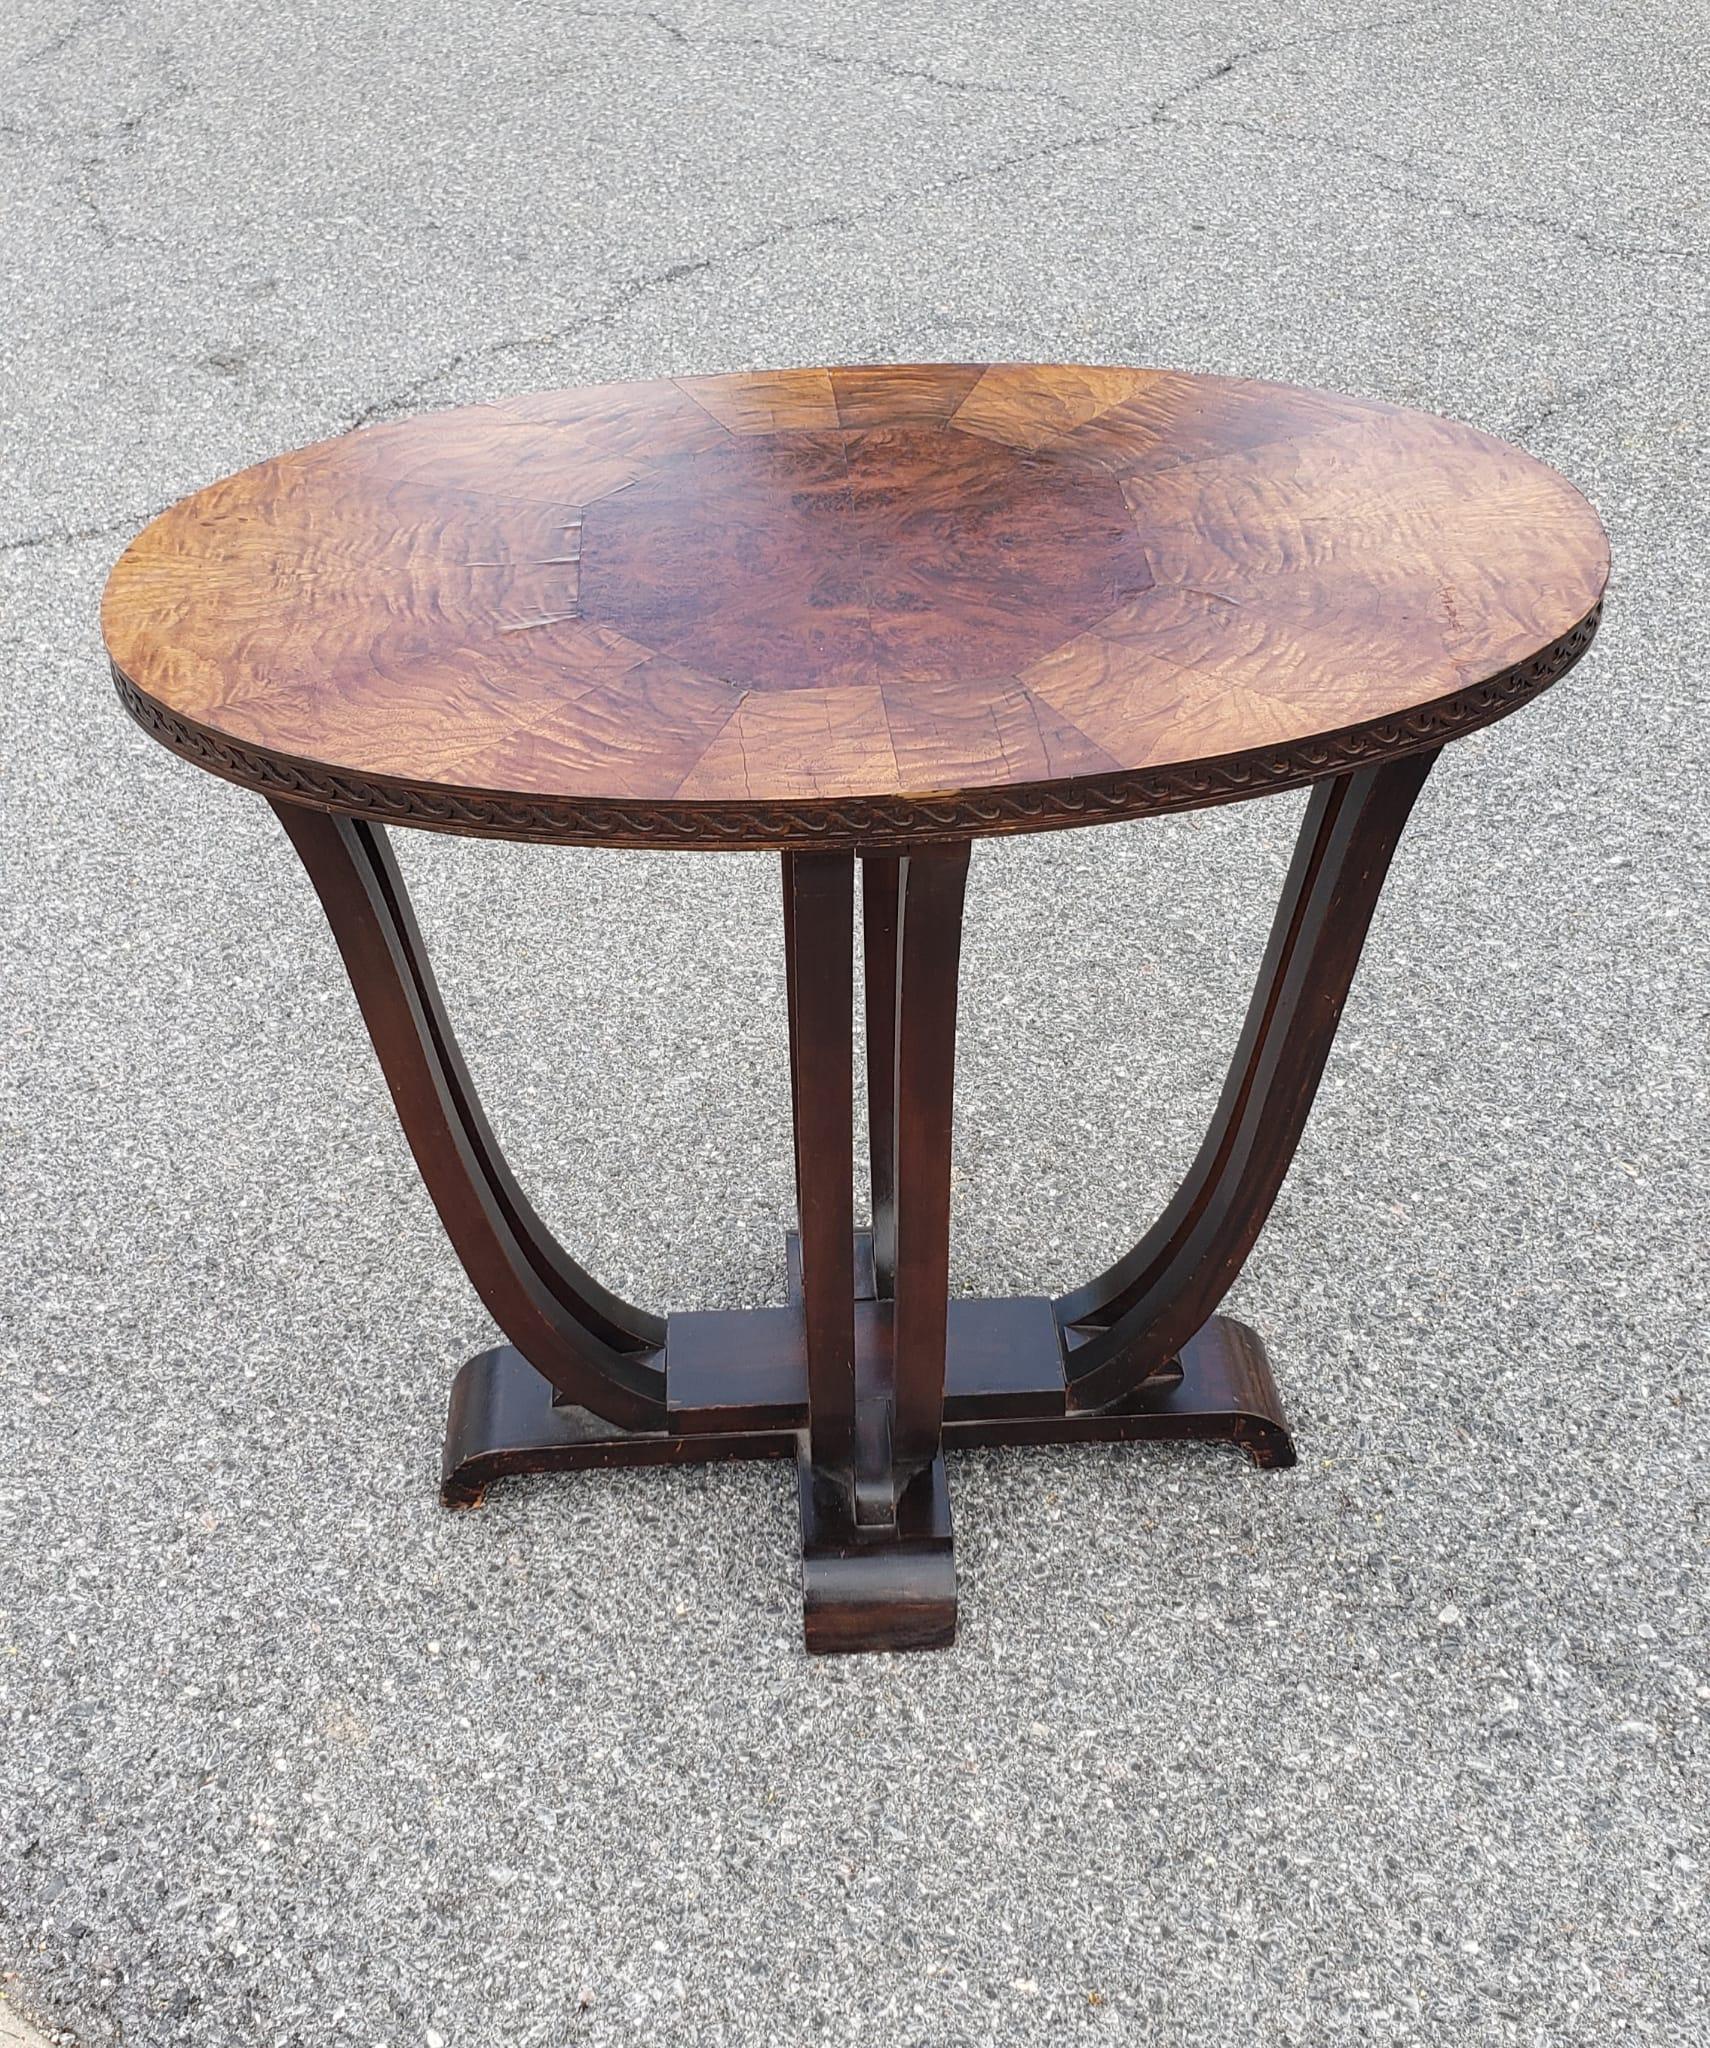 Edwardian Early 20th Century Burl Walnut Oval Center Table or Side Table For Sale